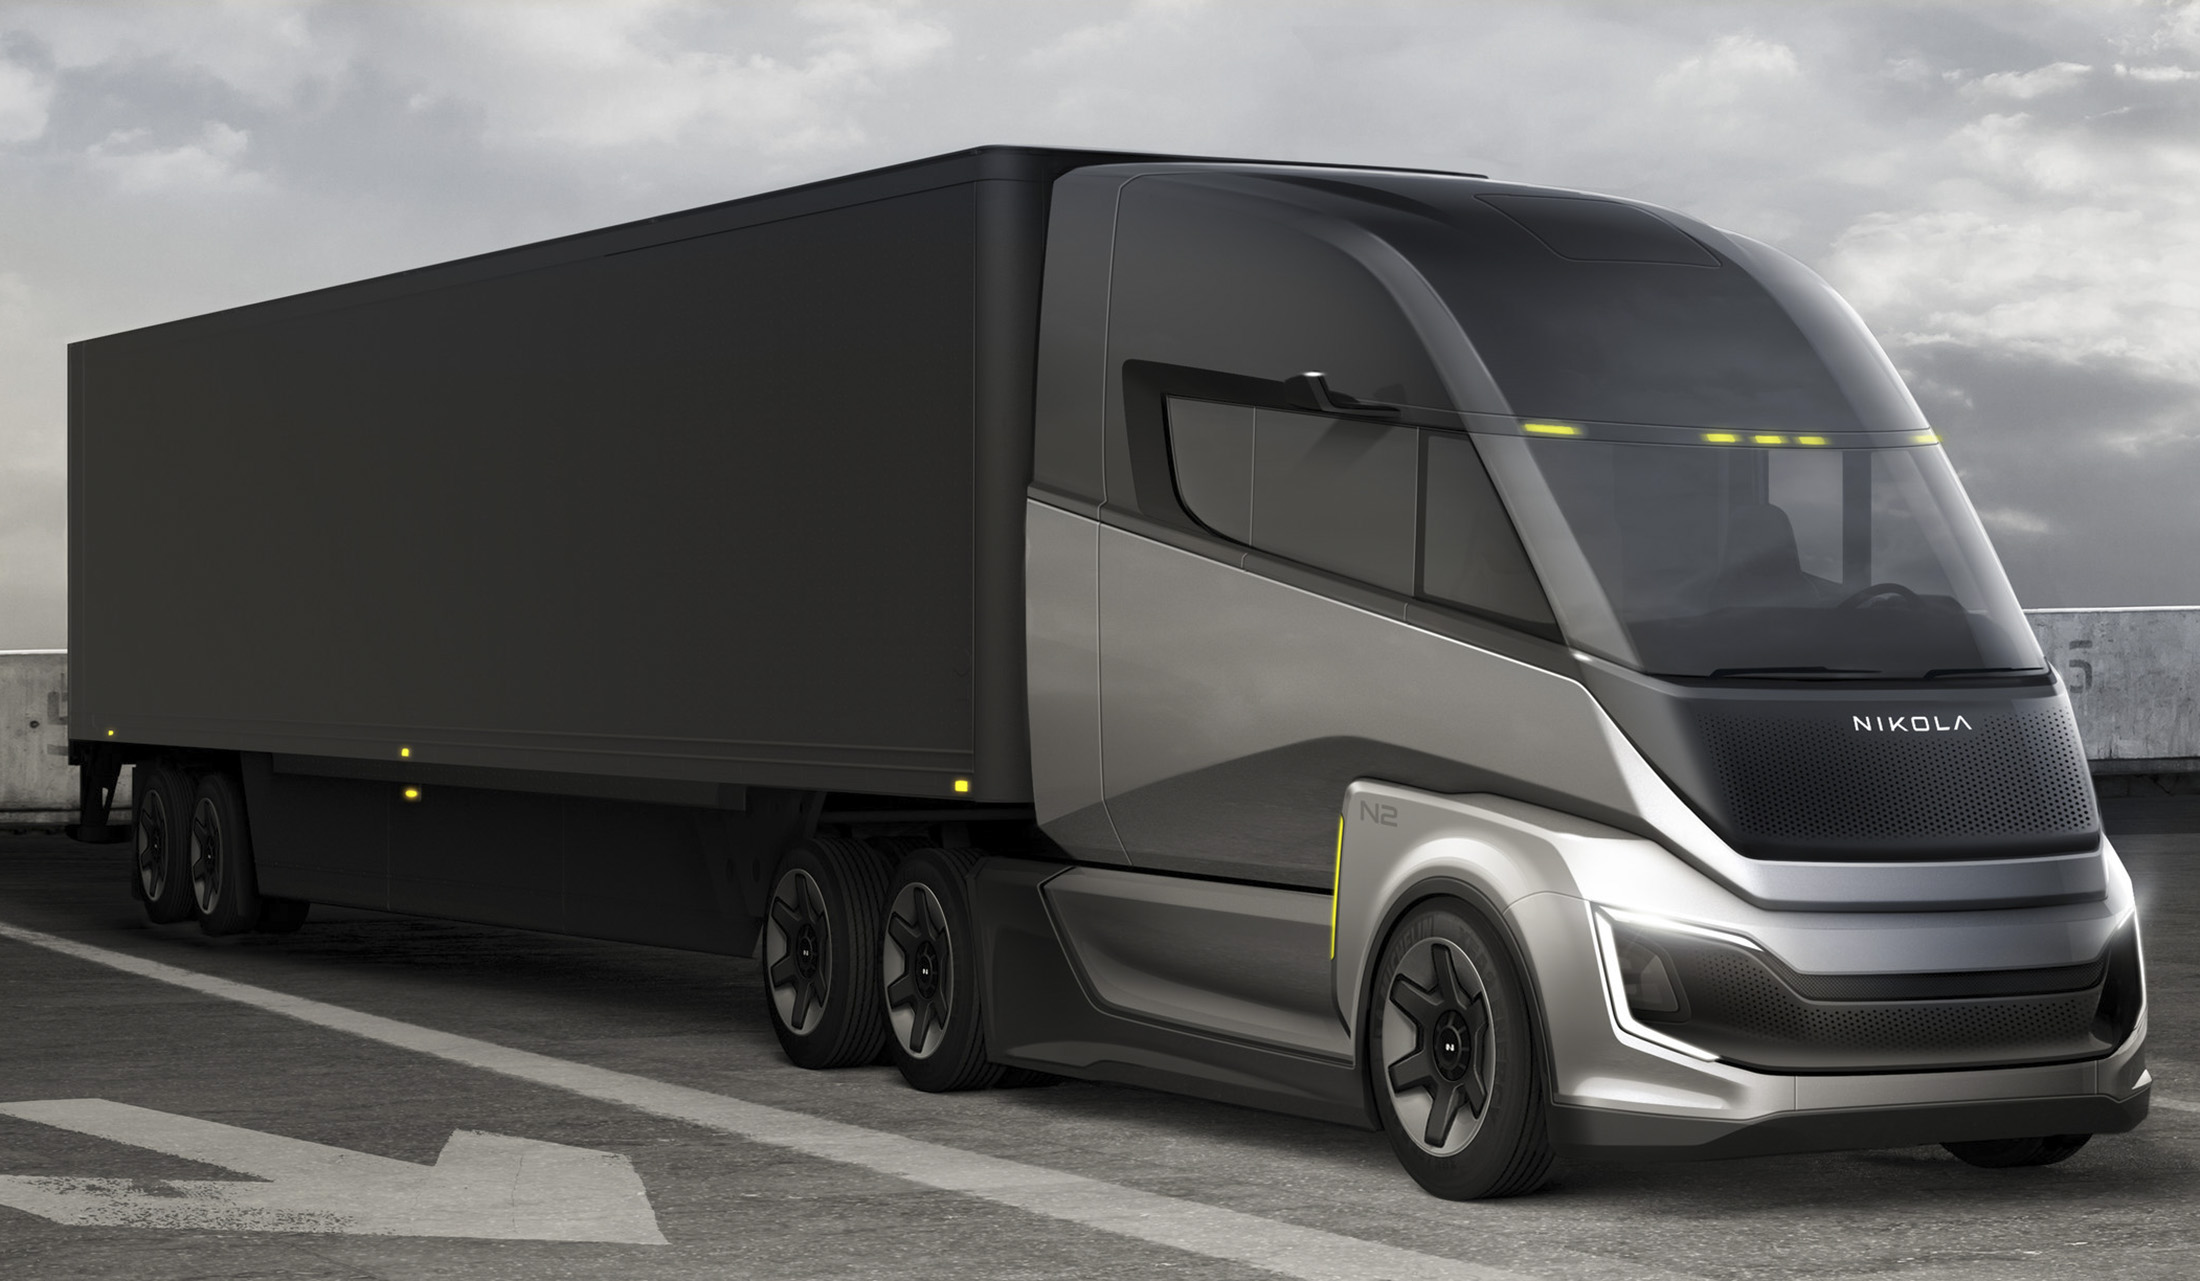 Electric Vehicle Companies Nikola and Lucid Group Report Q1 Results

